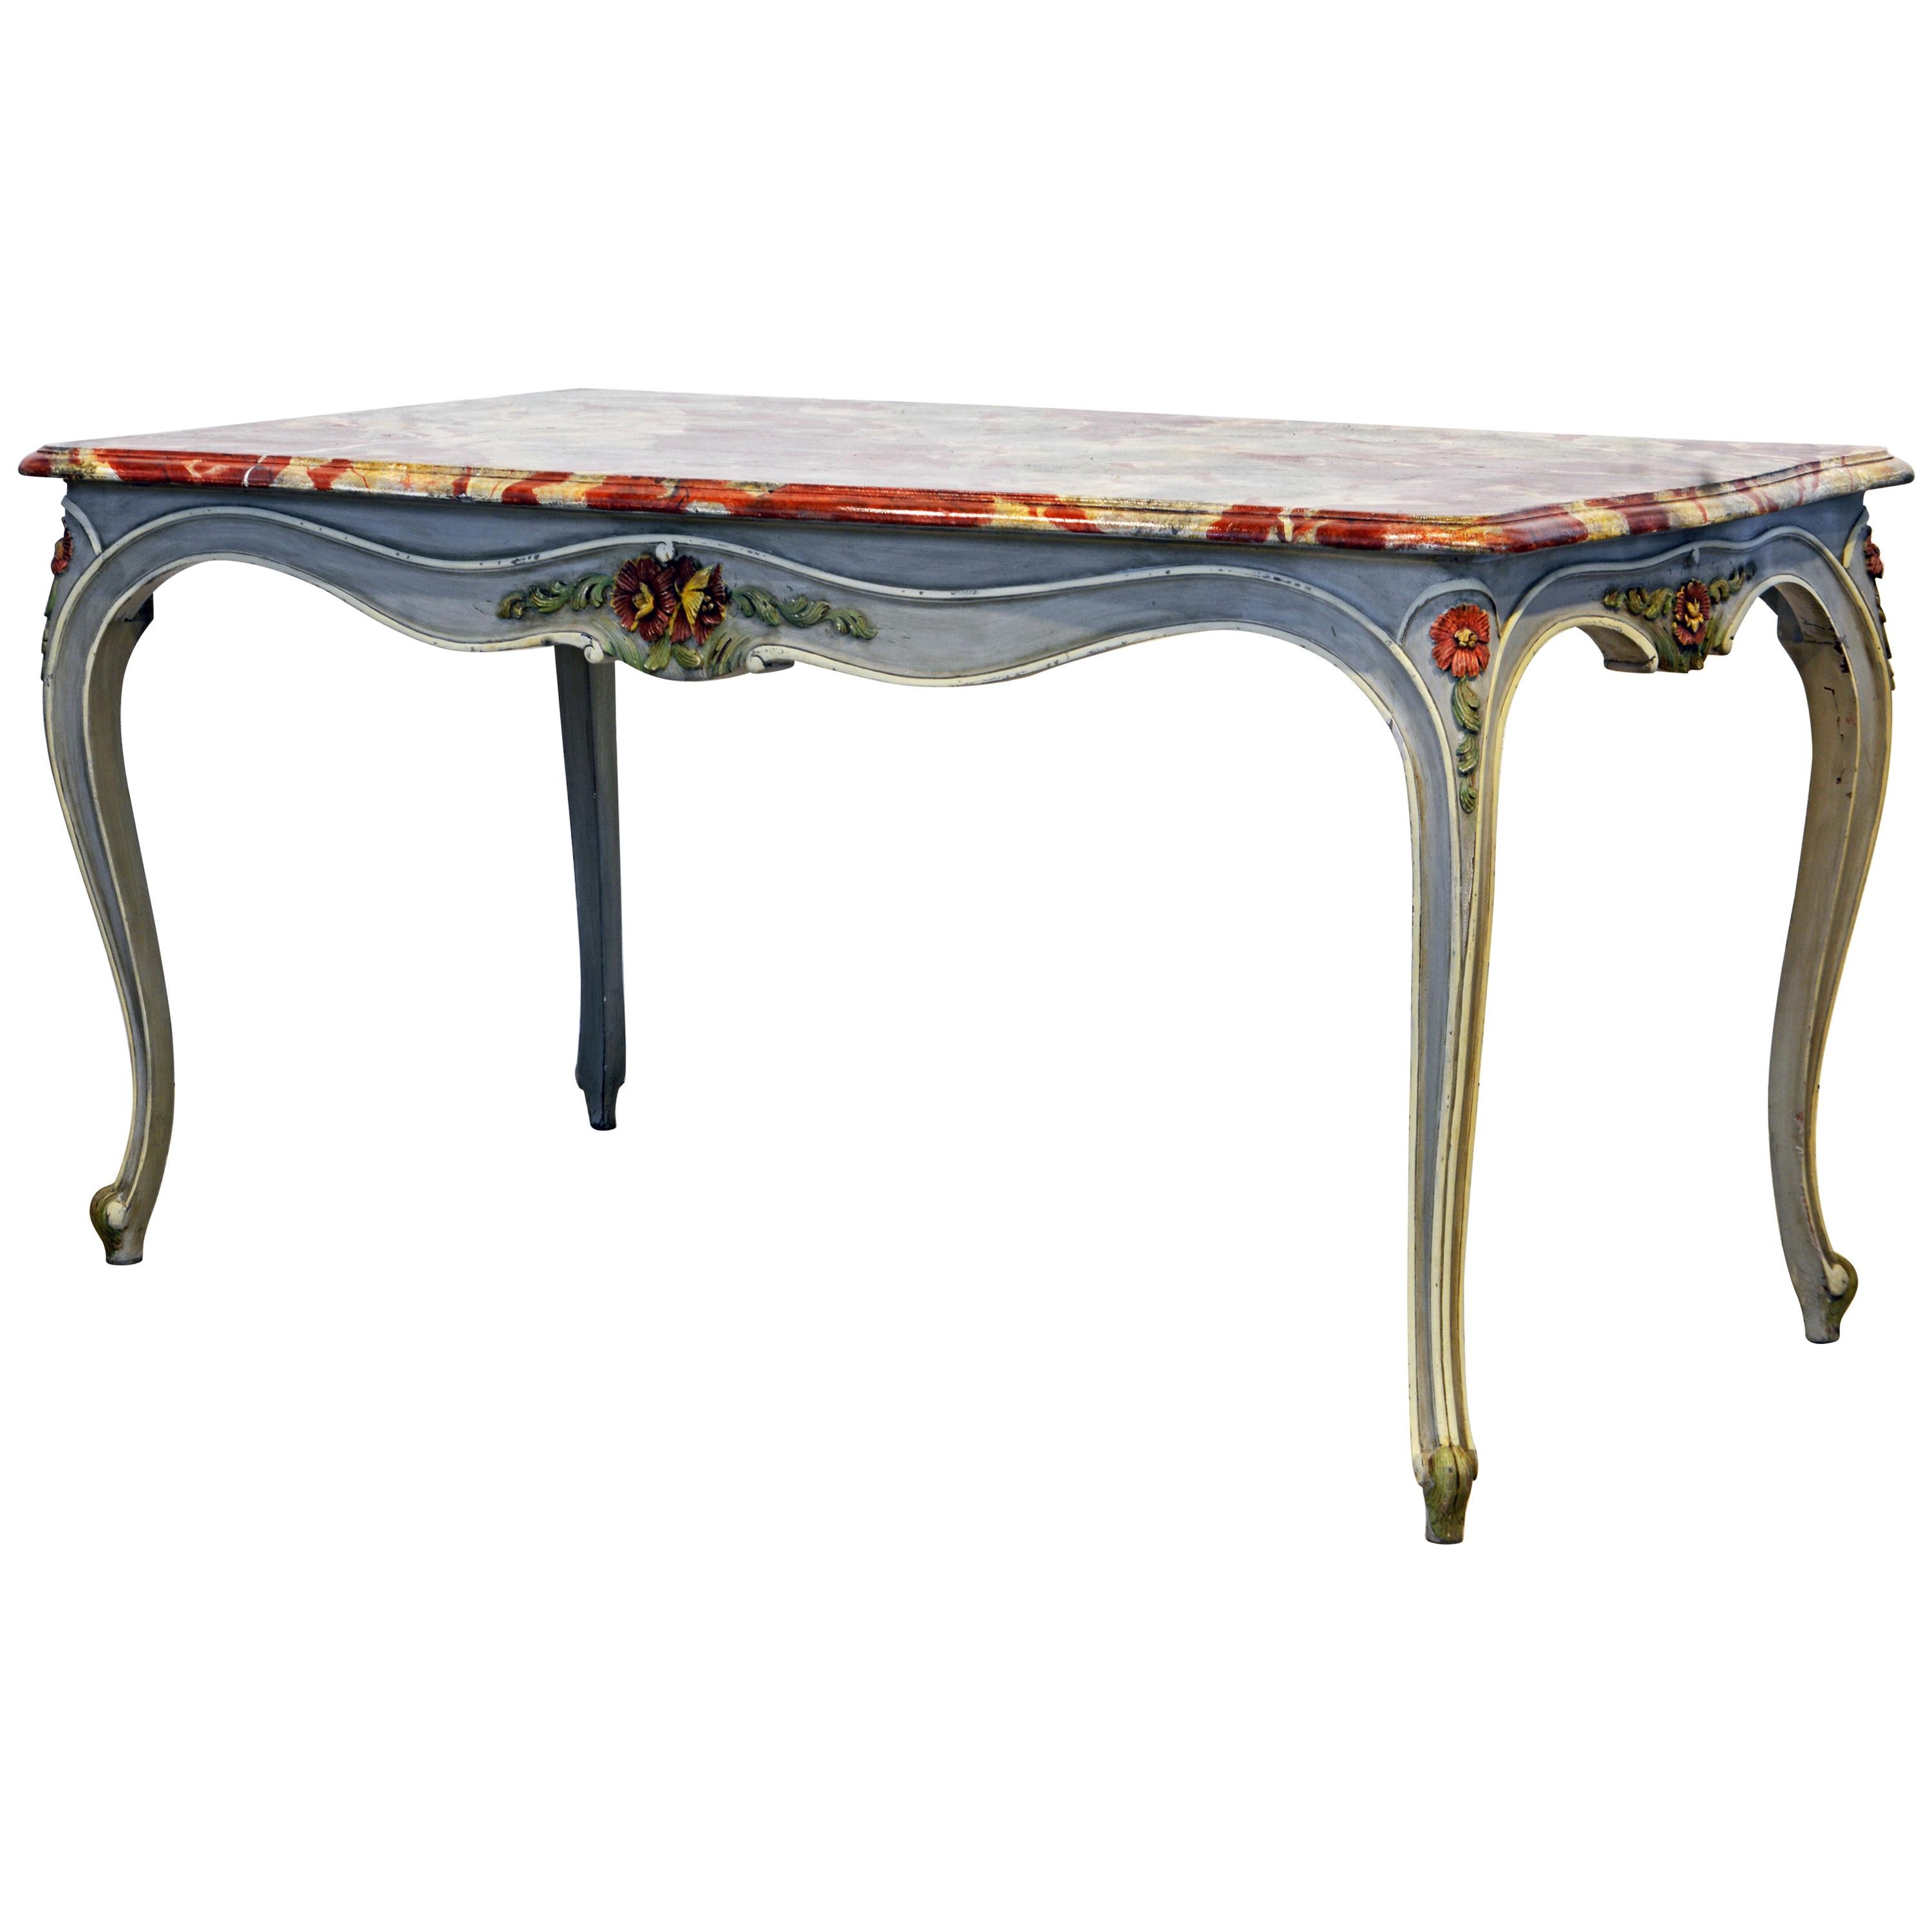 French Provincial Louis XV Style Painted Faux Marble-Top Dining Table